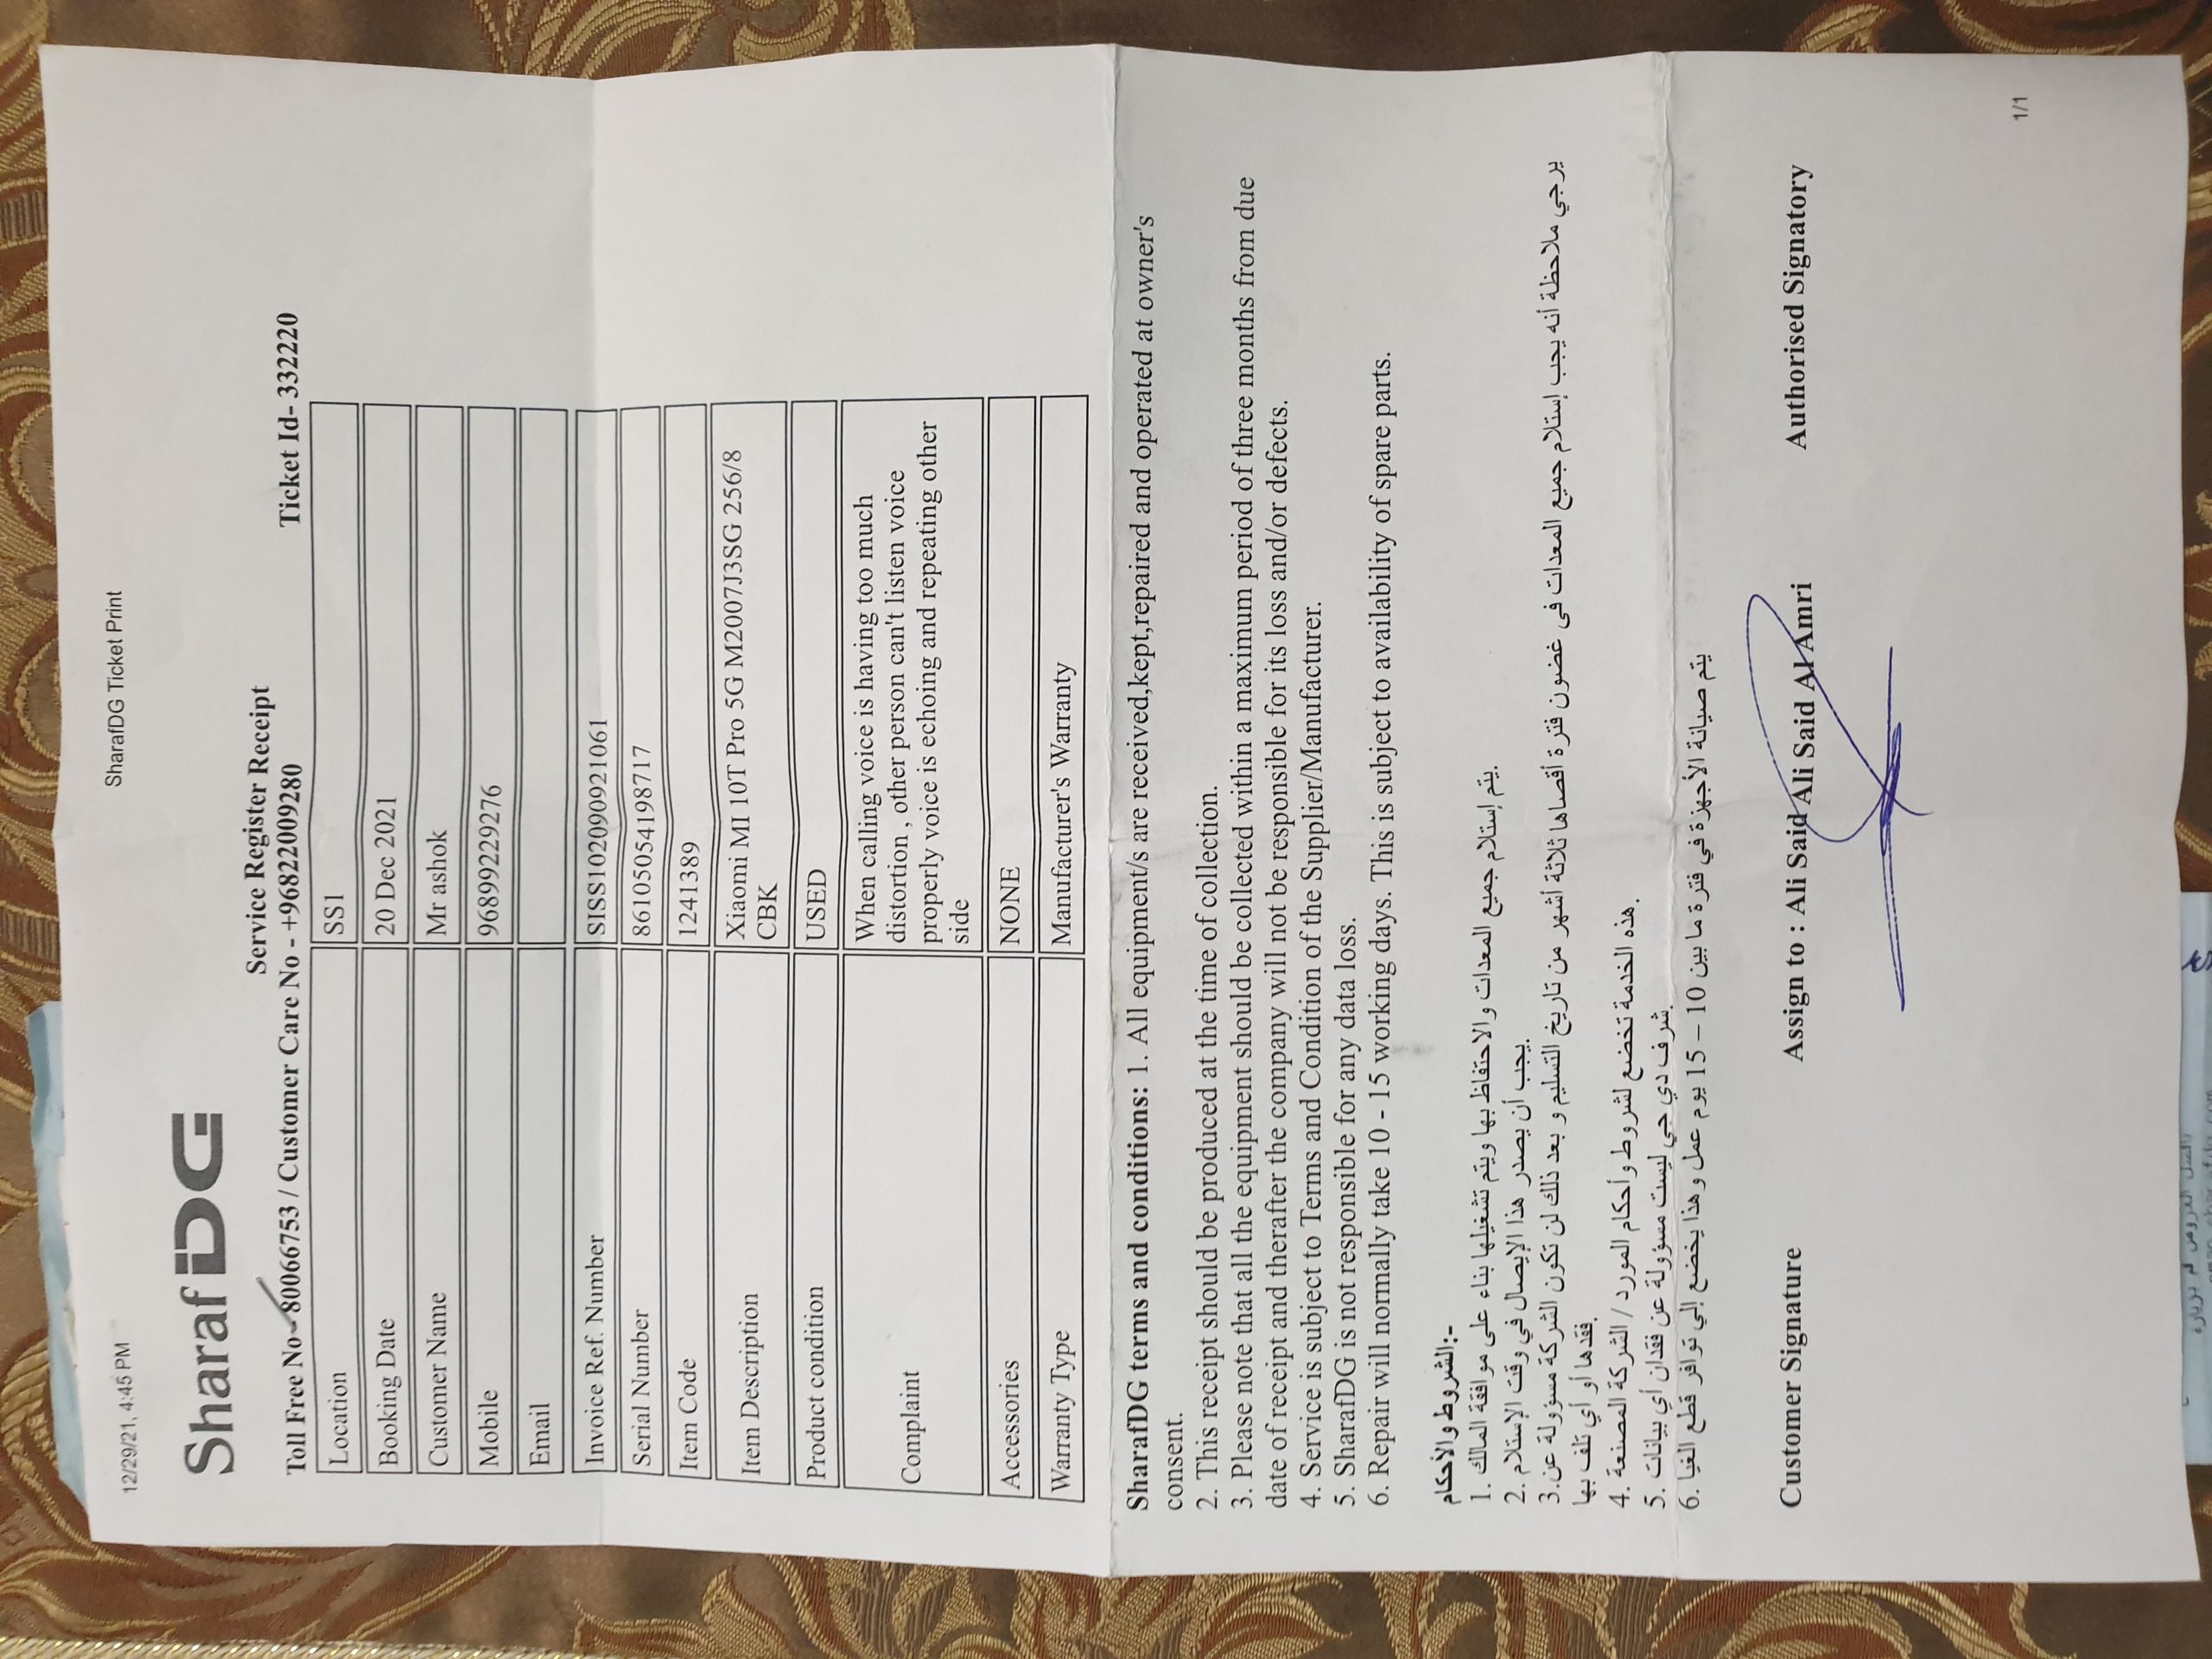 Sharaf DG complaint Warranty repair of phone-delivery delay